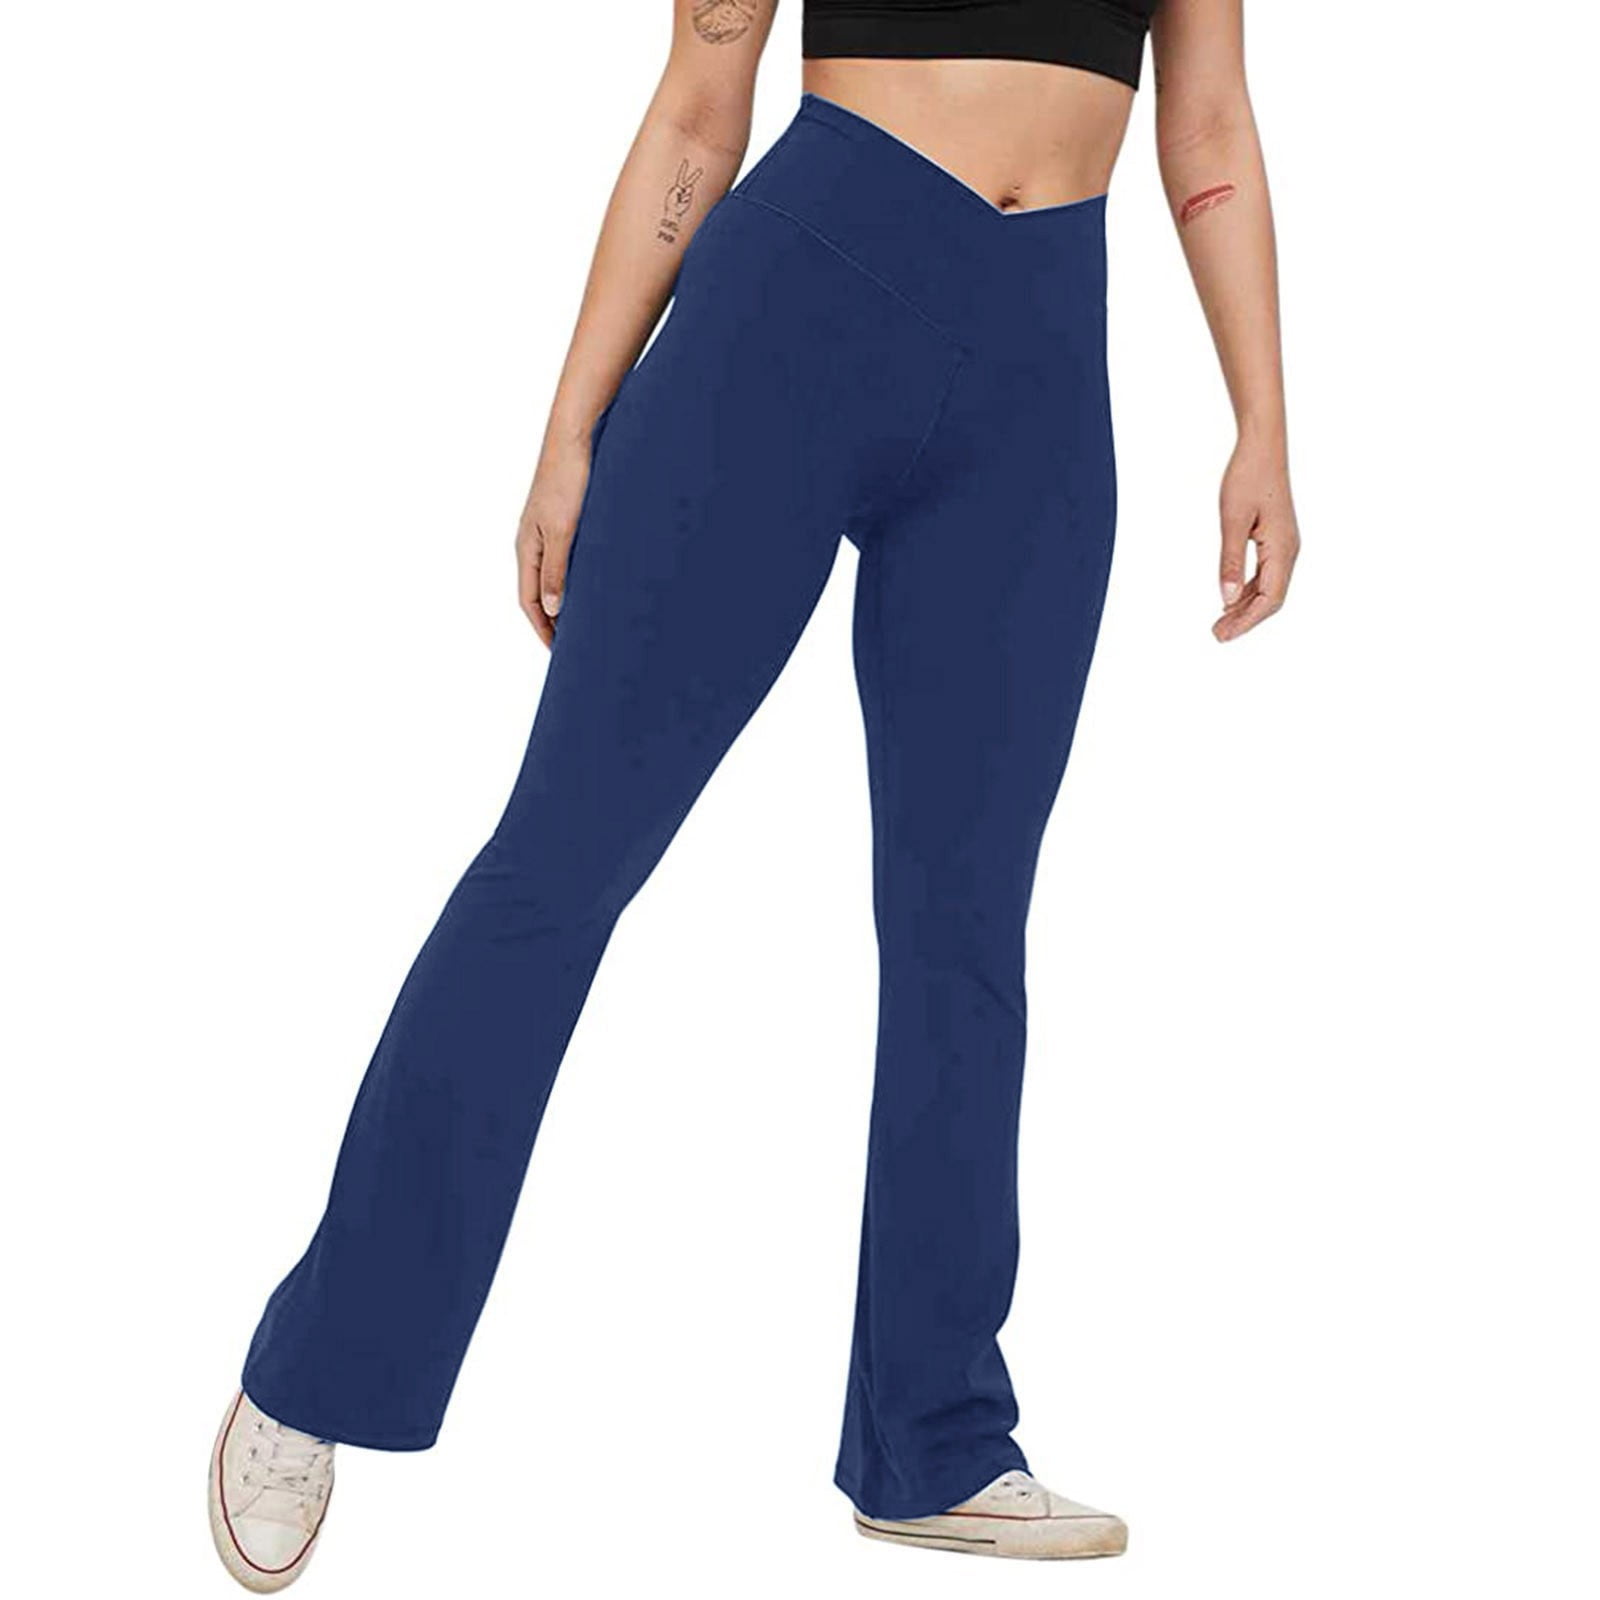 Labakihah Yoga Pants Women Yoga Pants High Waist Flare Leggings Wide  Straight Leg Sports Trousers Flared Trousers With Pocket For Yoga Pilates  Fitness Pants For Women Blue 